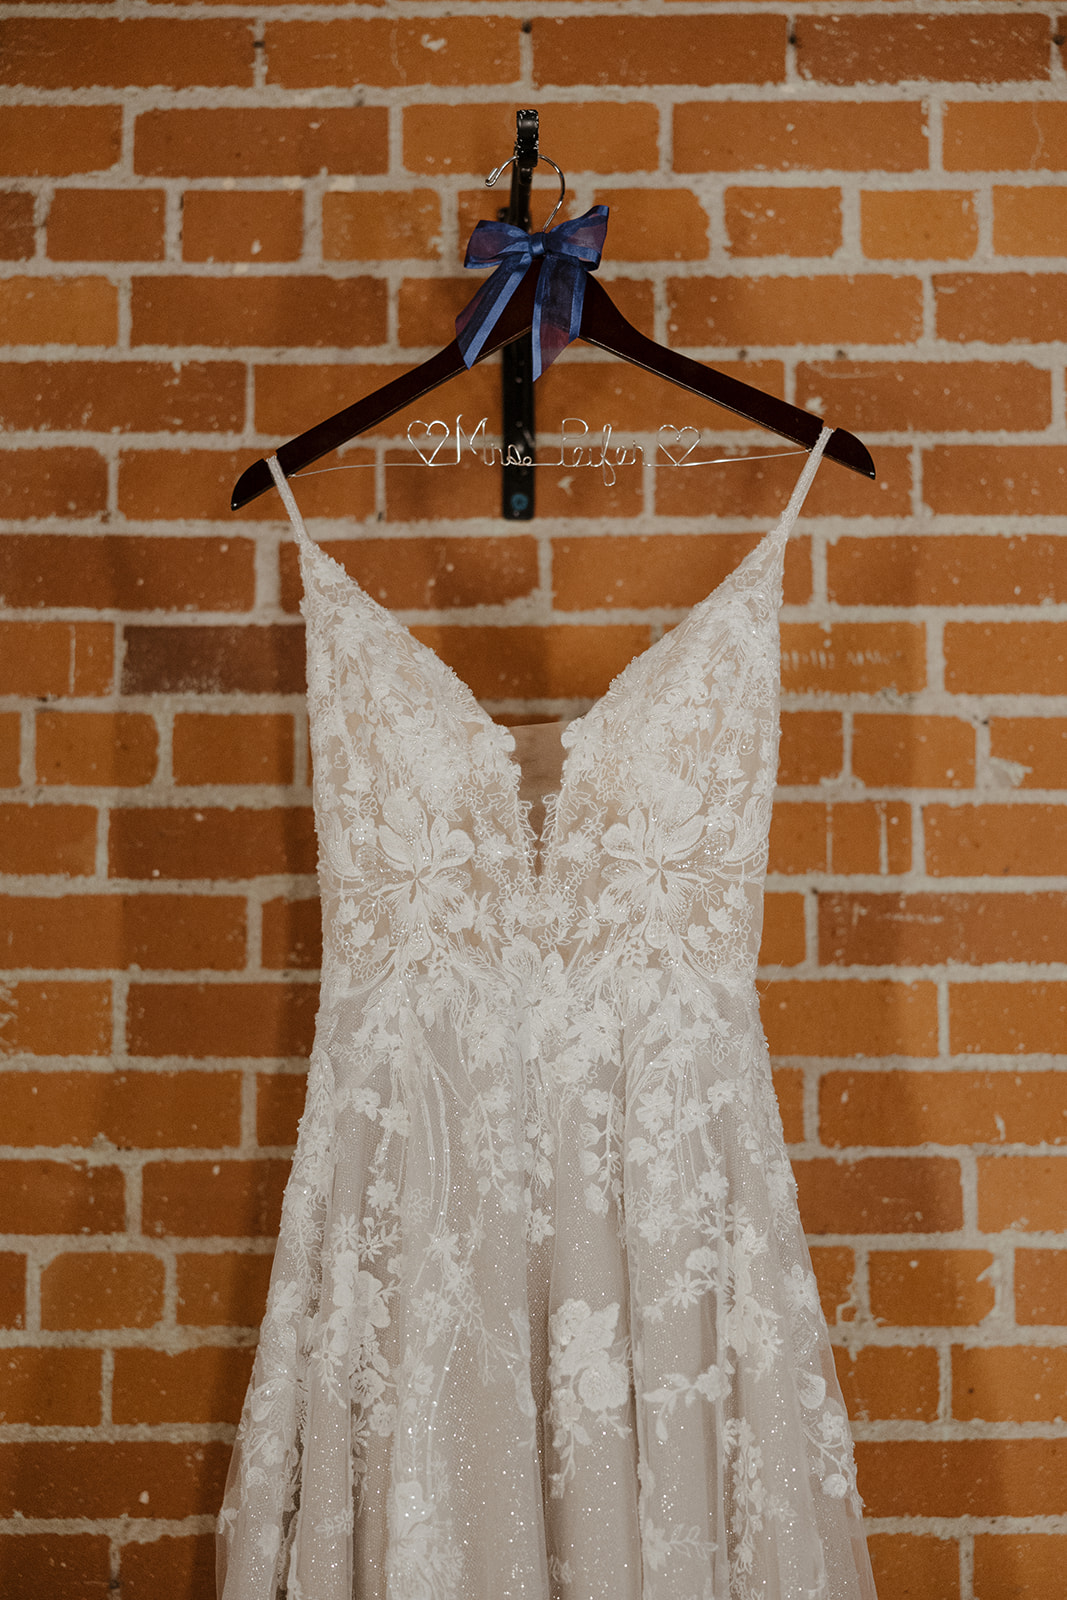 Stunning wedding dress hangs in front of a brick wall before the dreamy Arizona wedding day